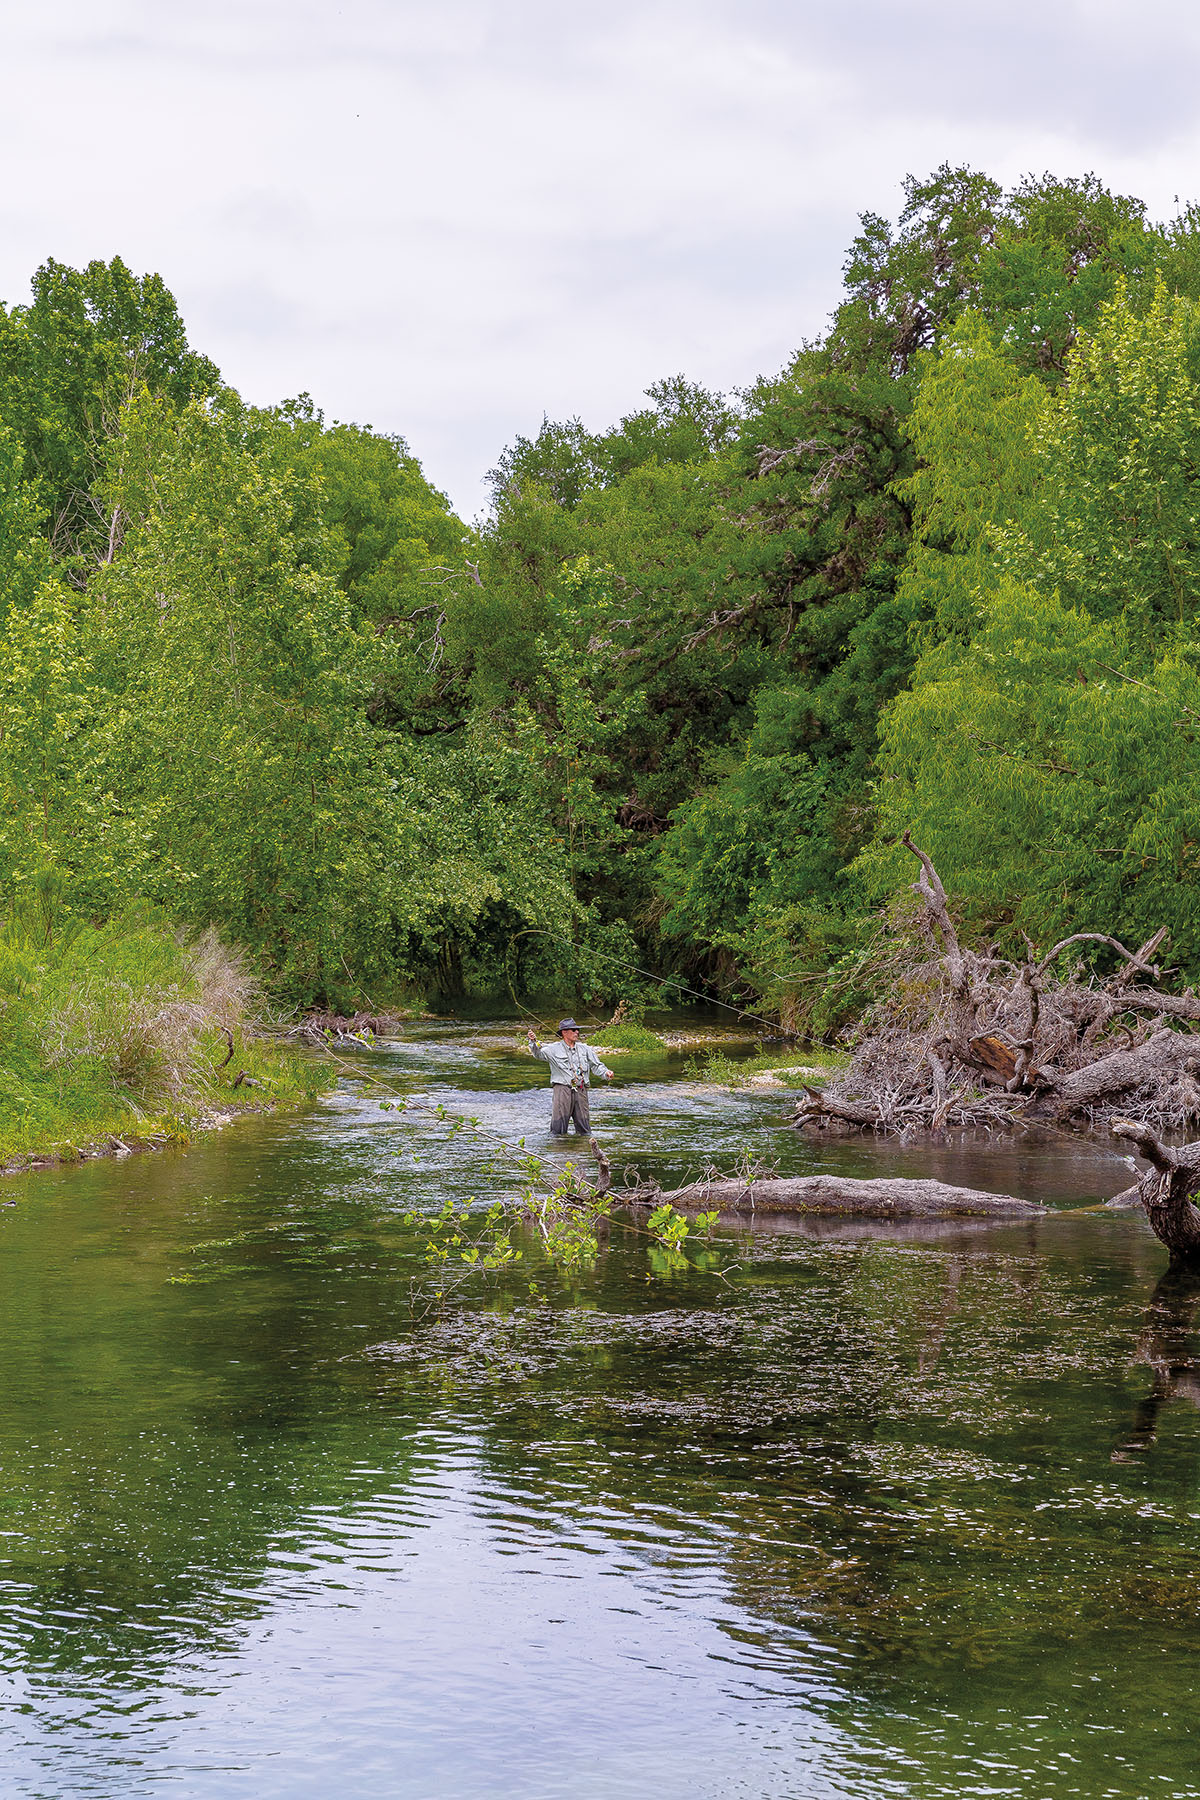 A man stands fly fishing in a river wearing waders